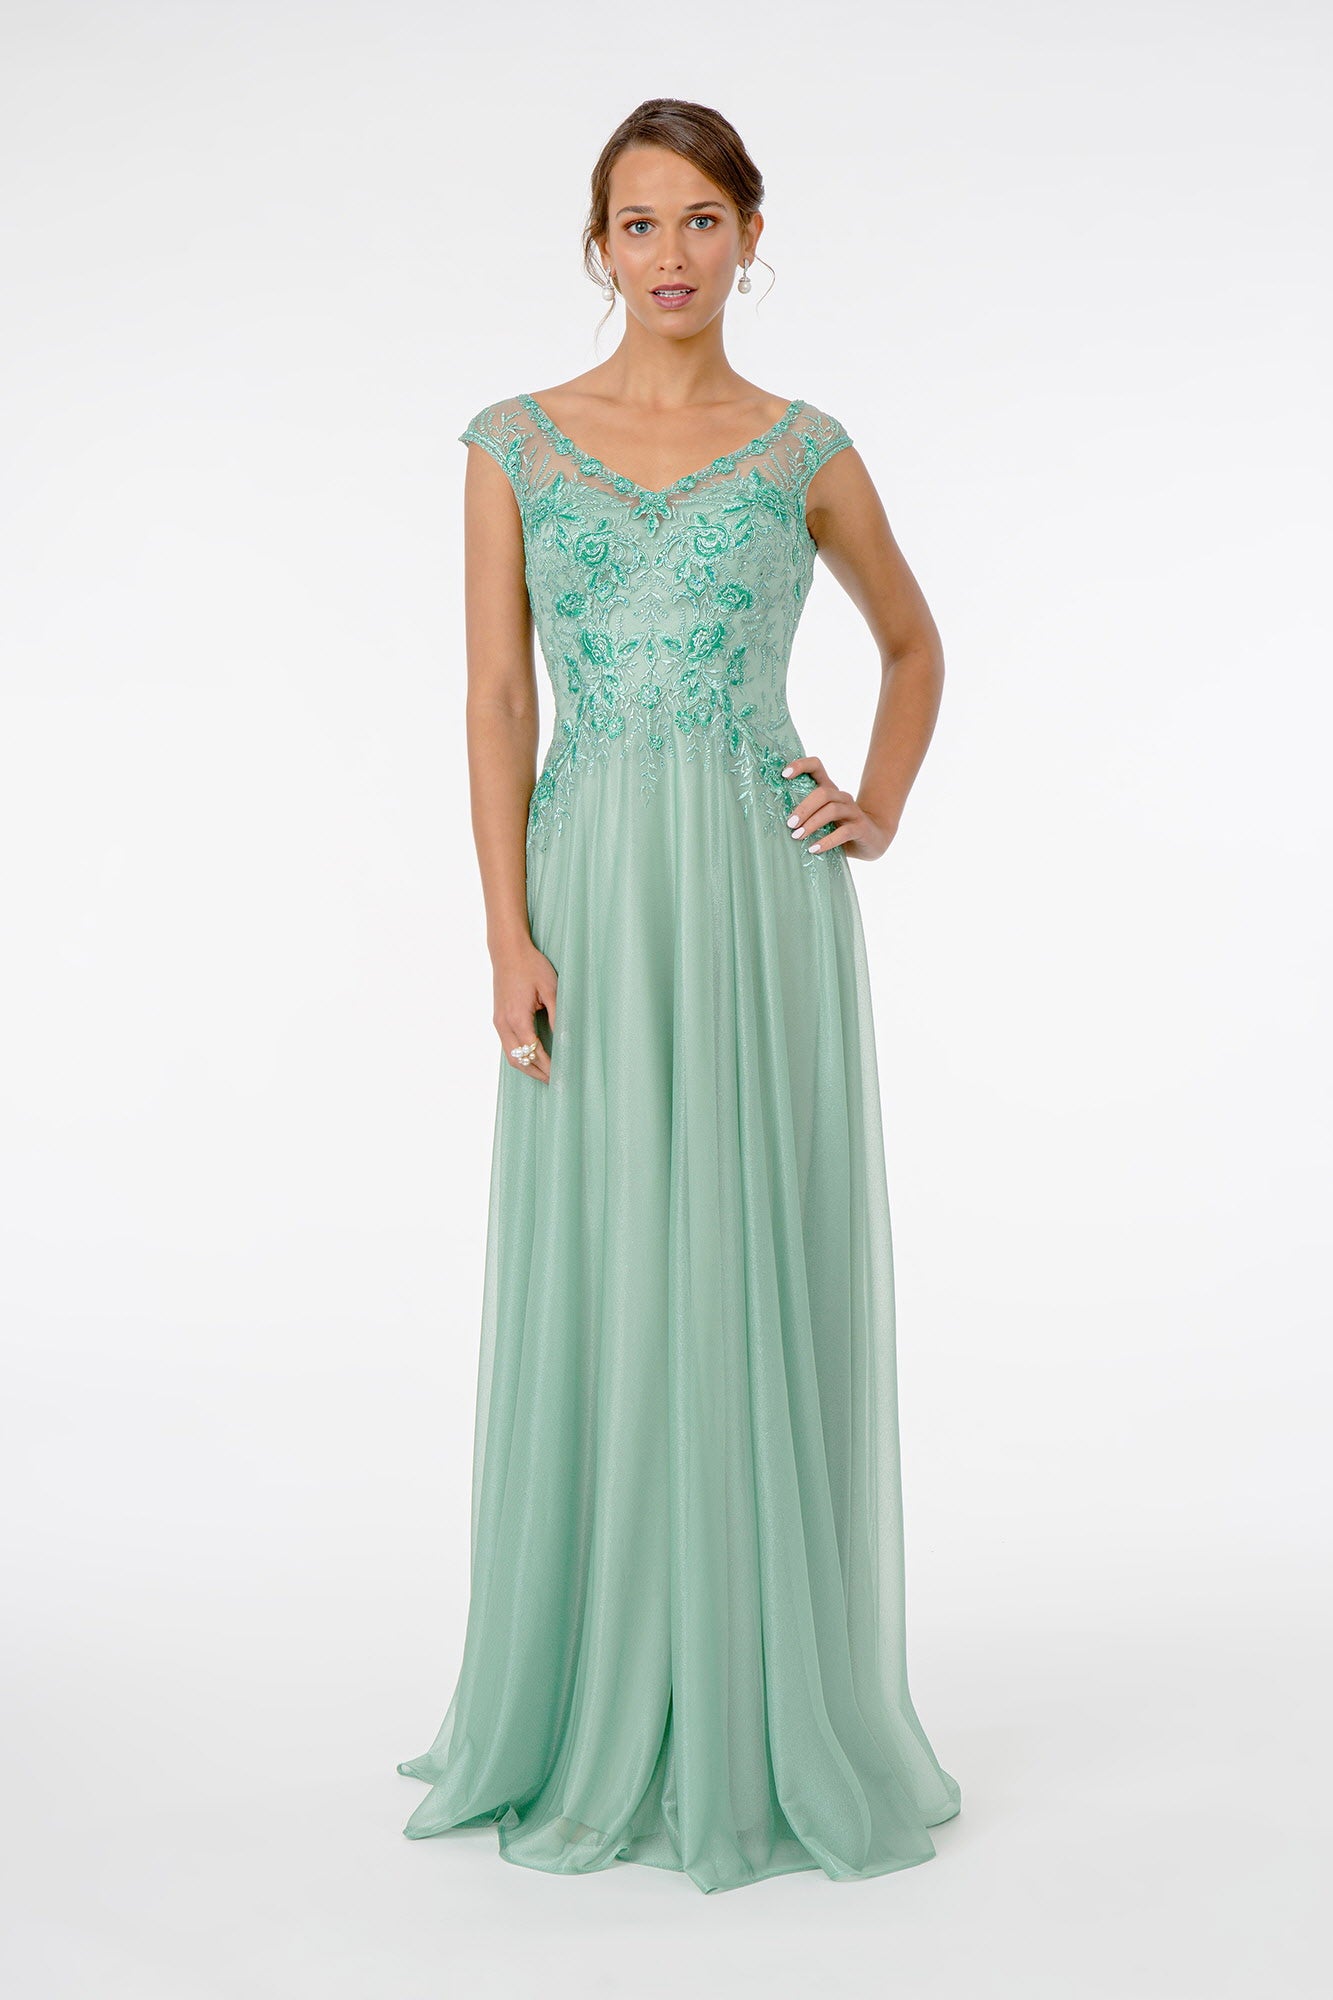 Woman in elegant green embroidered gown.